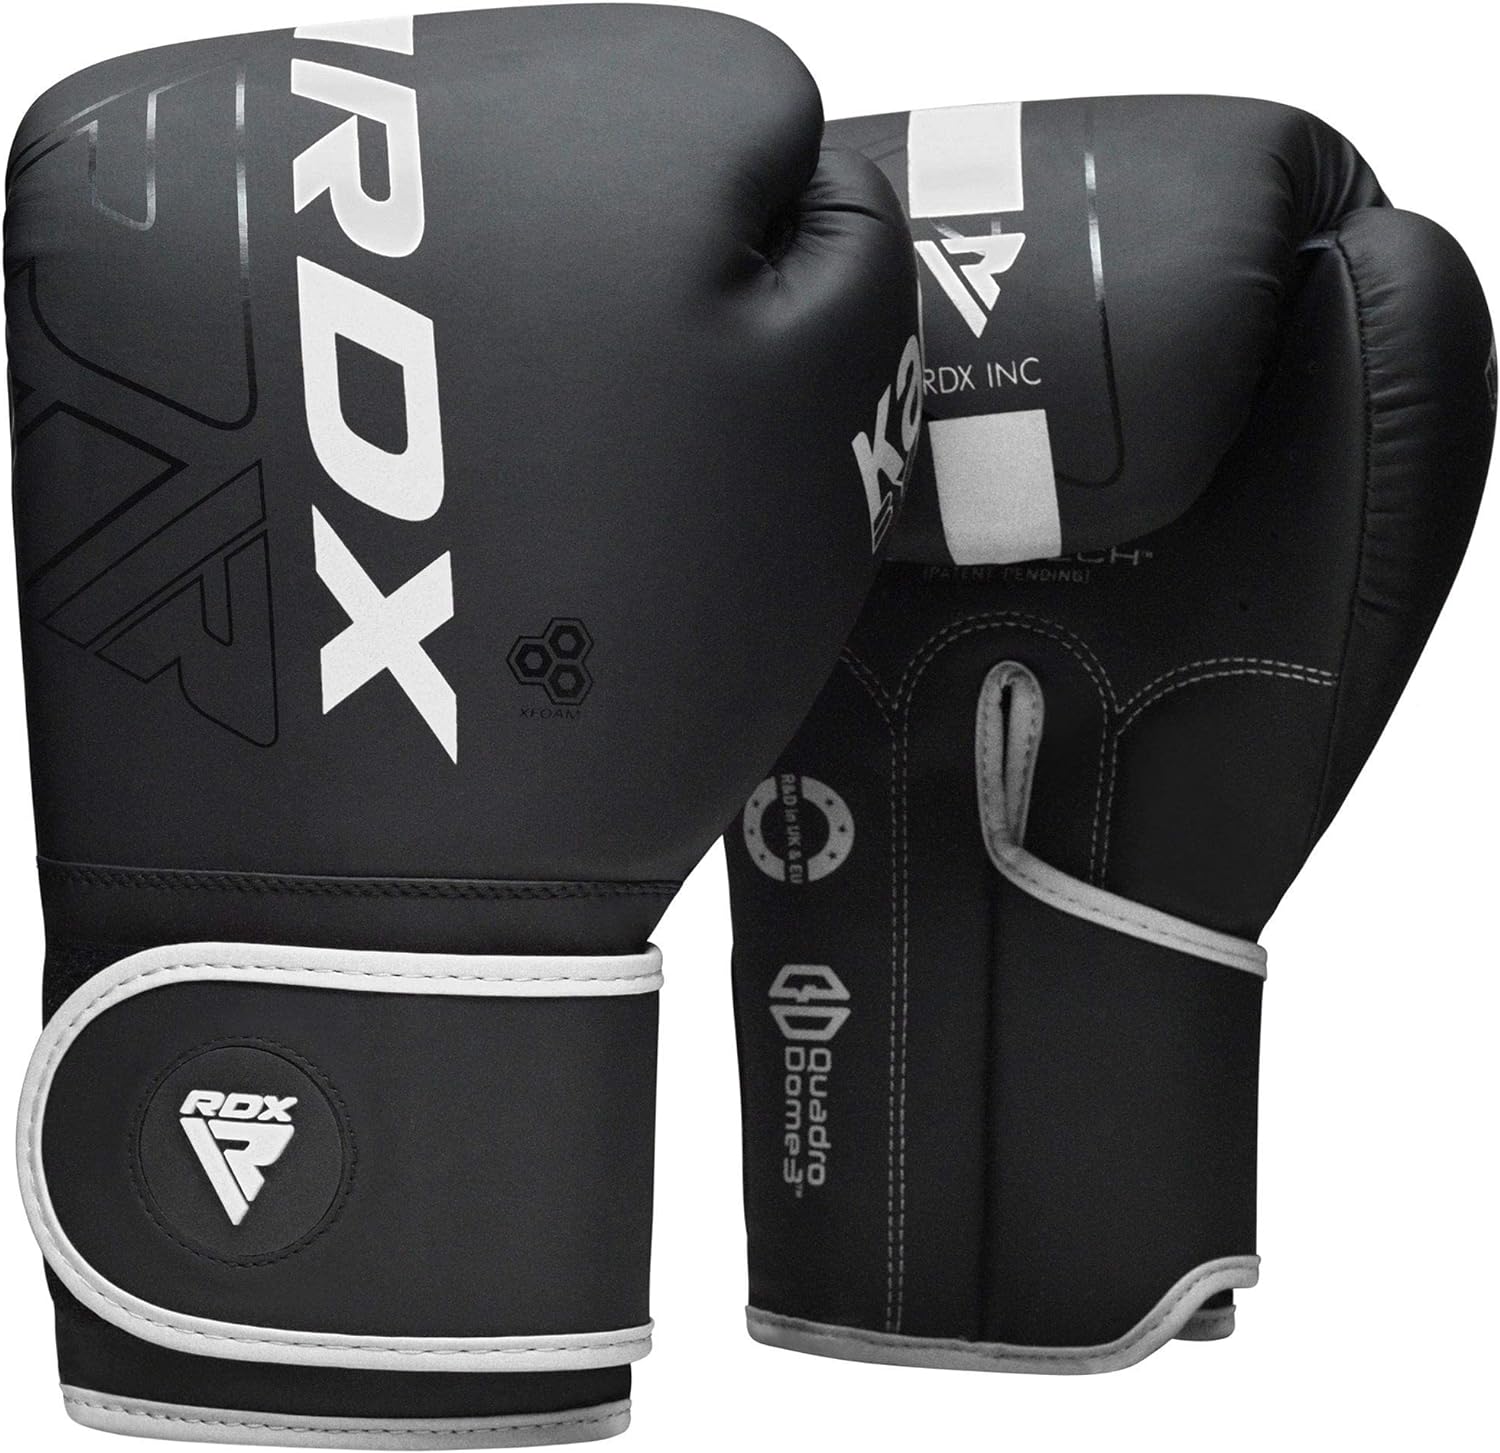 Eclipse Martial Art Supplies Training Gloves WHITE / 10 OZ RDX Boxing Gloves Men Women, Pro Training Sparring, Maya Hide Leather Muay Thai MMA Kickboxing, Adult Heavy Punching Bag Gloves Mitts Focus Pad Workout, Ventilated Palm